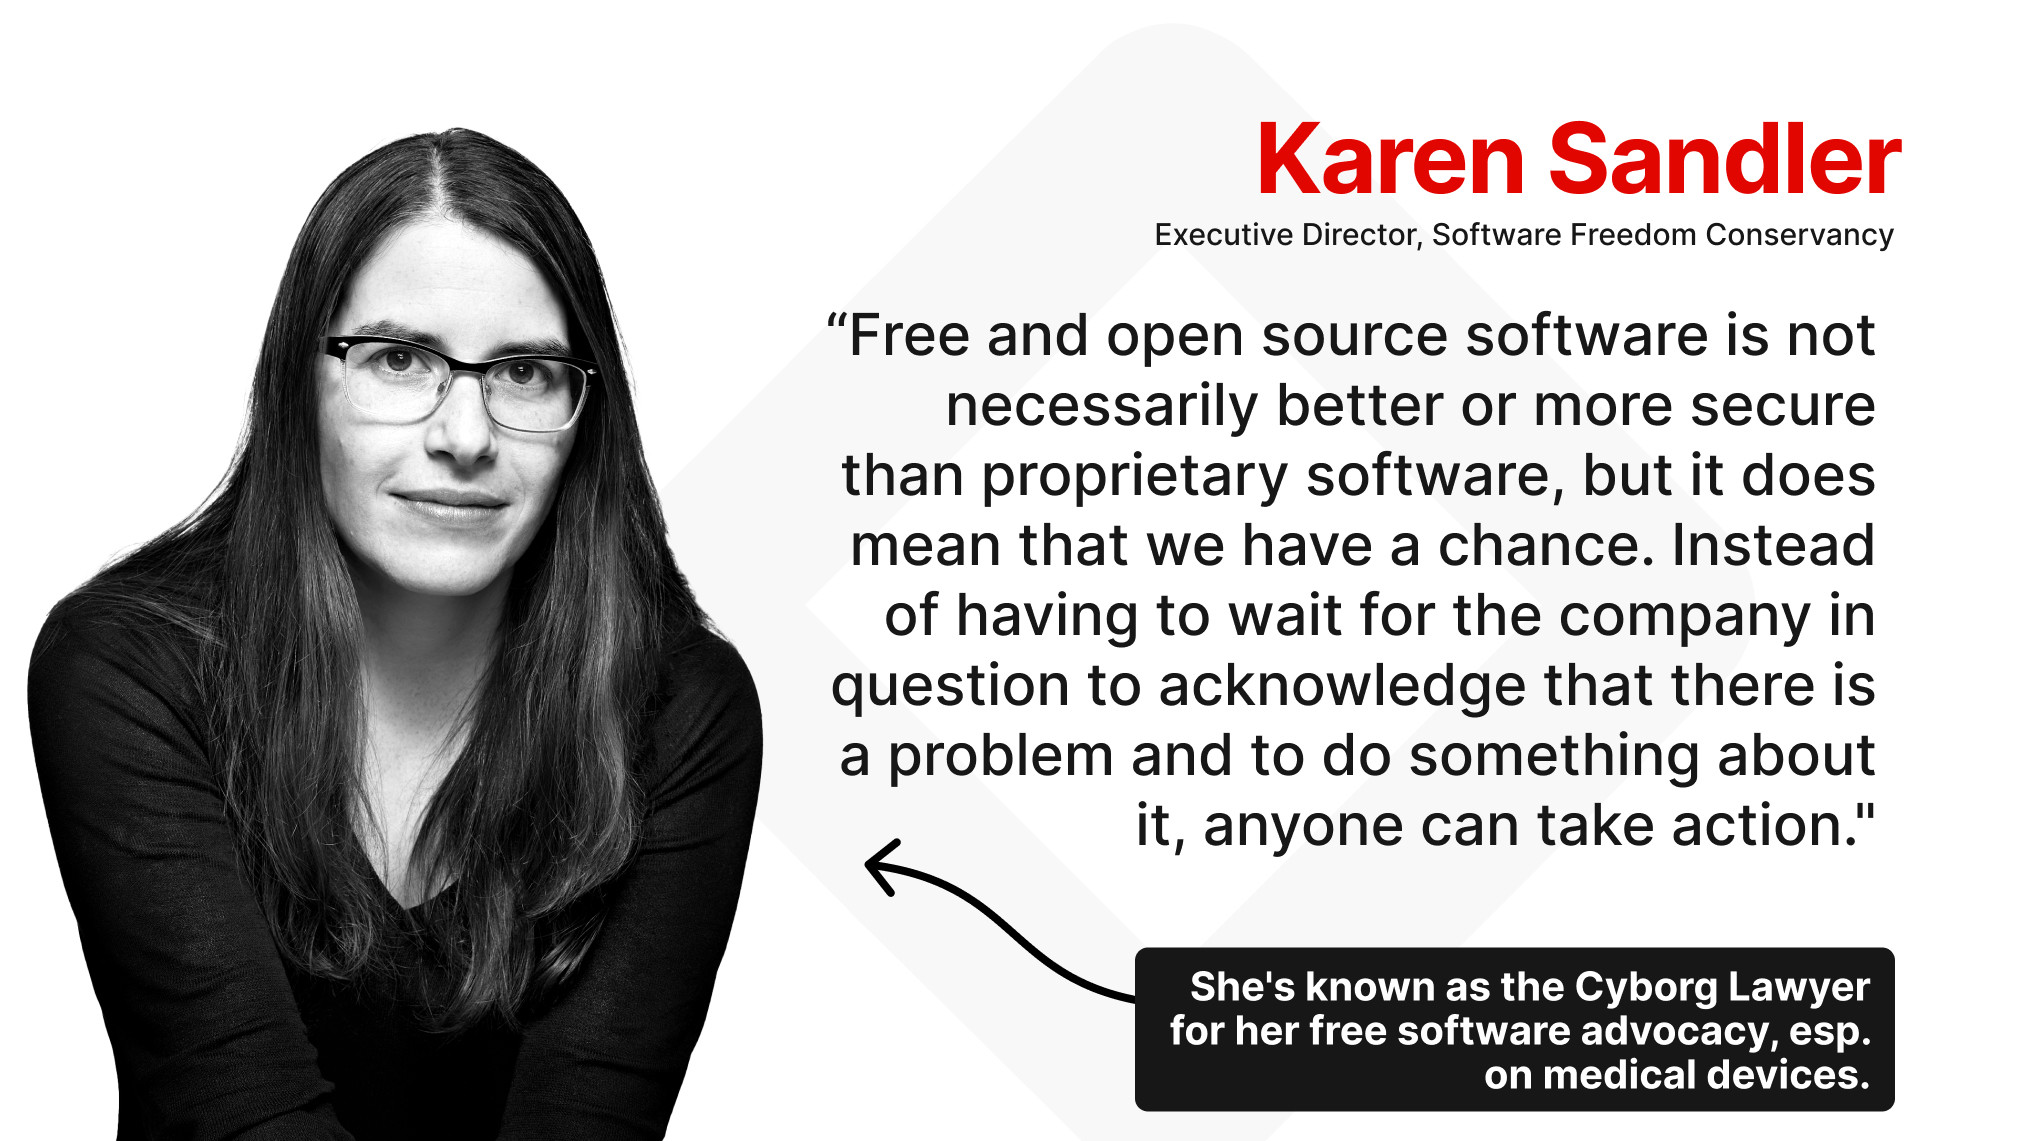 "Free and open source software is not necessarily better or more secure than proprietary software, but it does mean that we have a chance. Instead of having to wait for the company in question to acknowledge that there is a problem and to do something about it, anyone can take action.”

- Karen Sandler